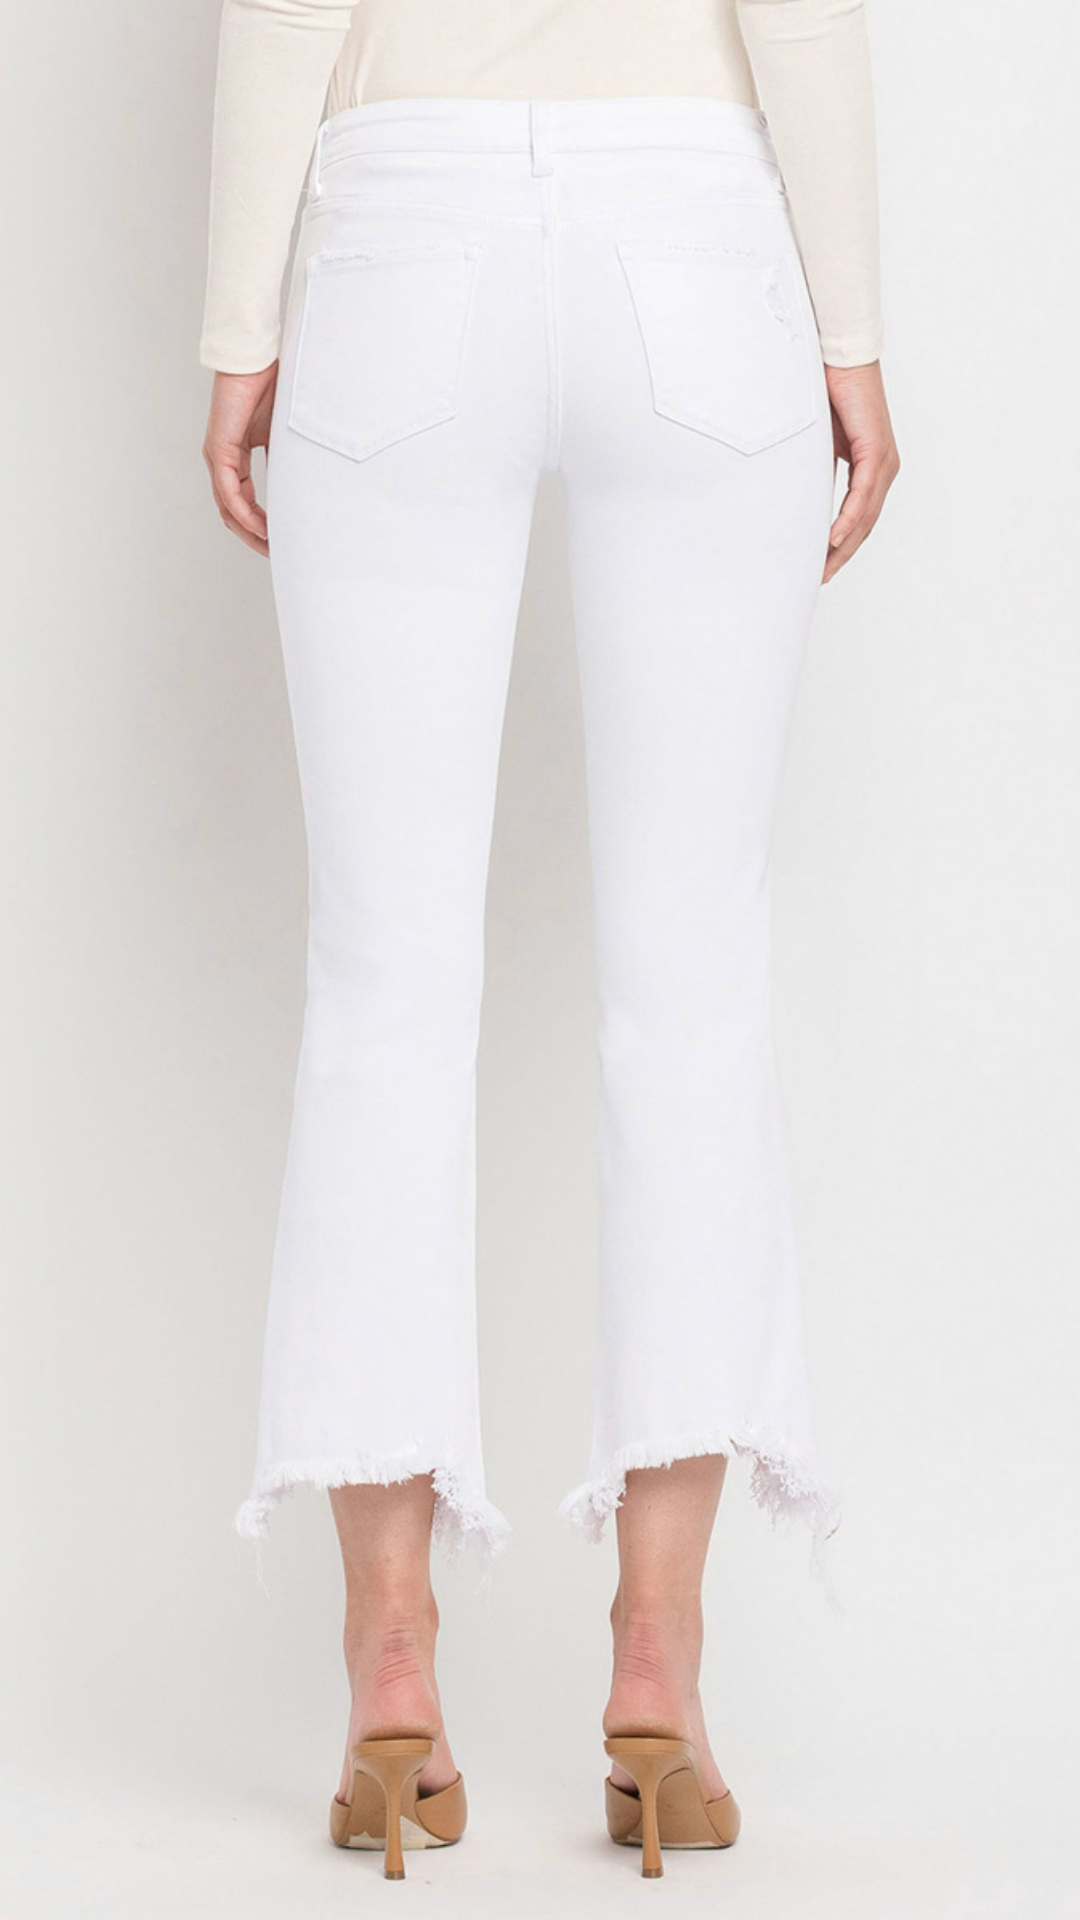 White Mid Rise Distressed Hem Ankle Bootcut Jeans